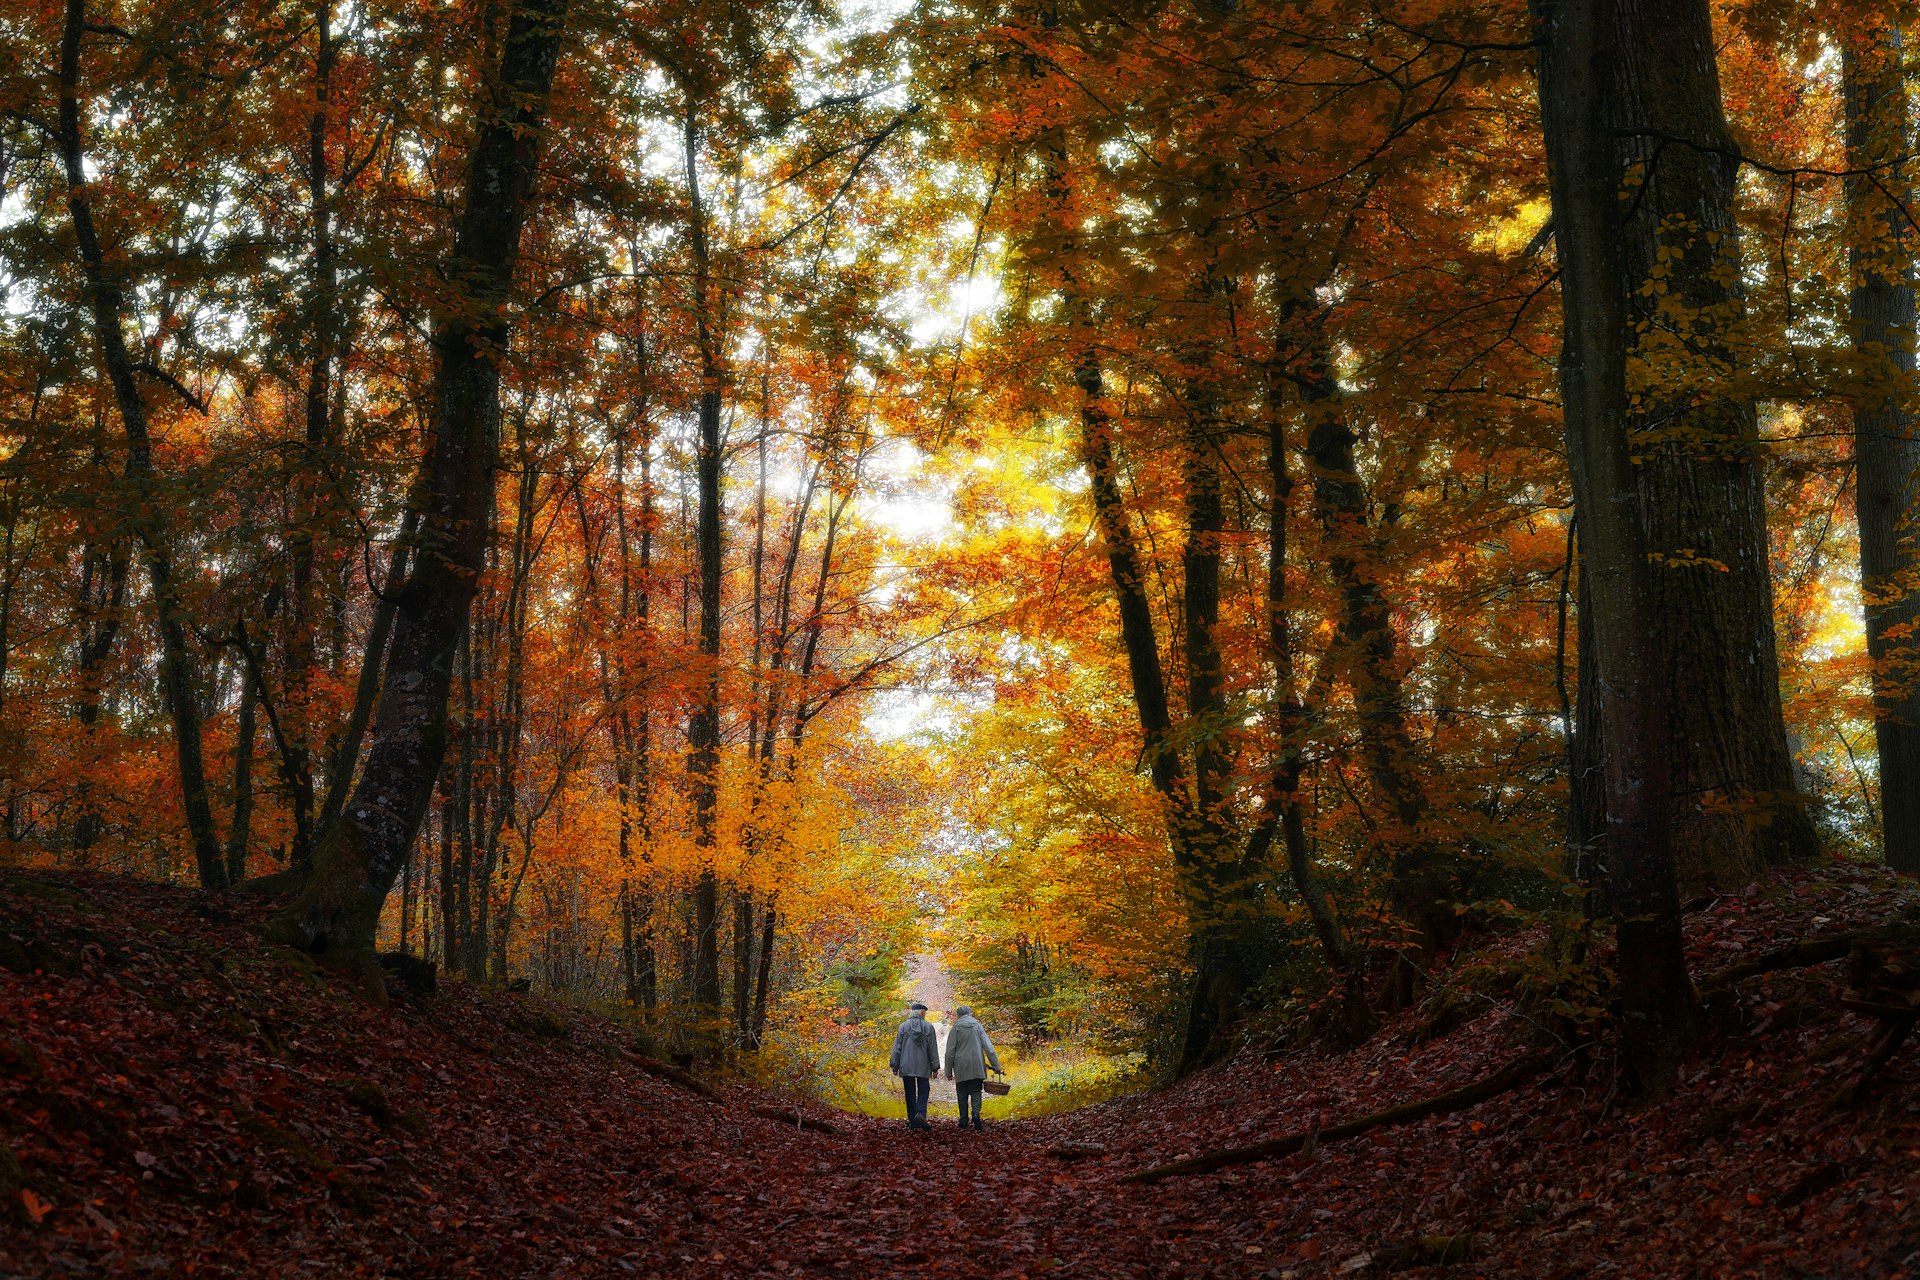 An elderly couple walk through the forest of Fontainebleau during autumn.